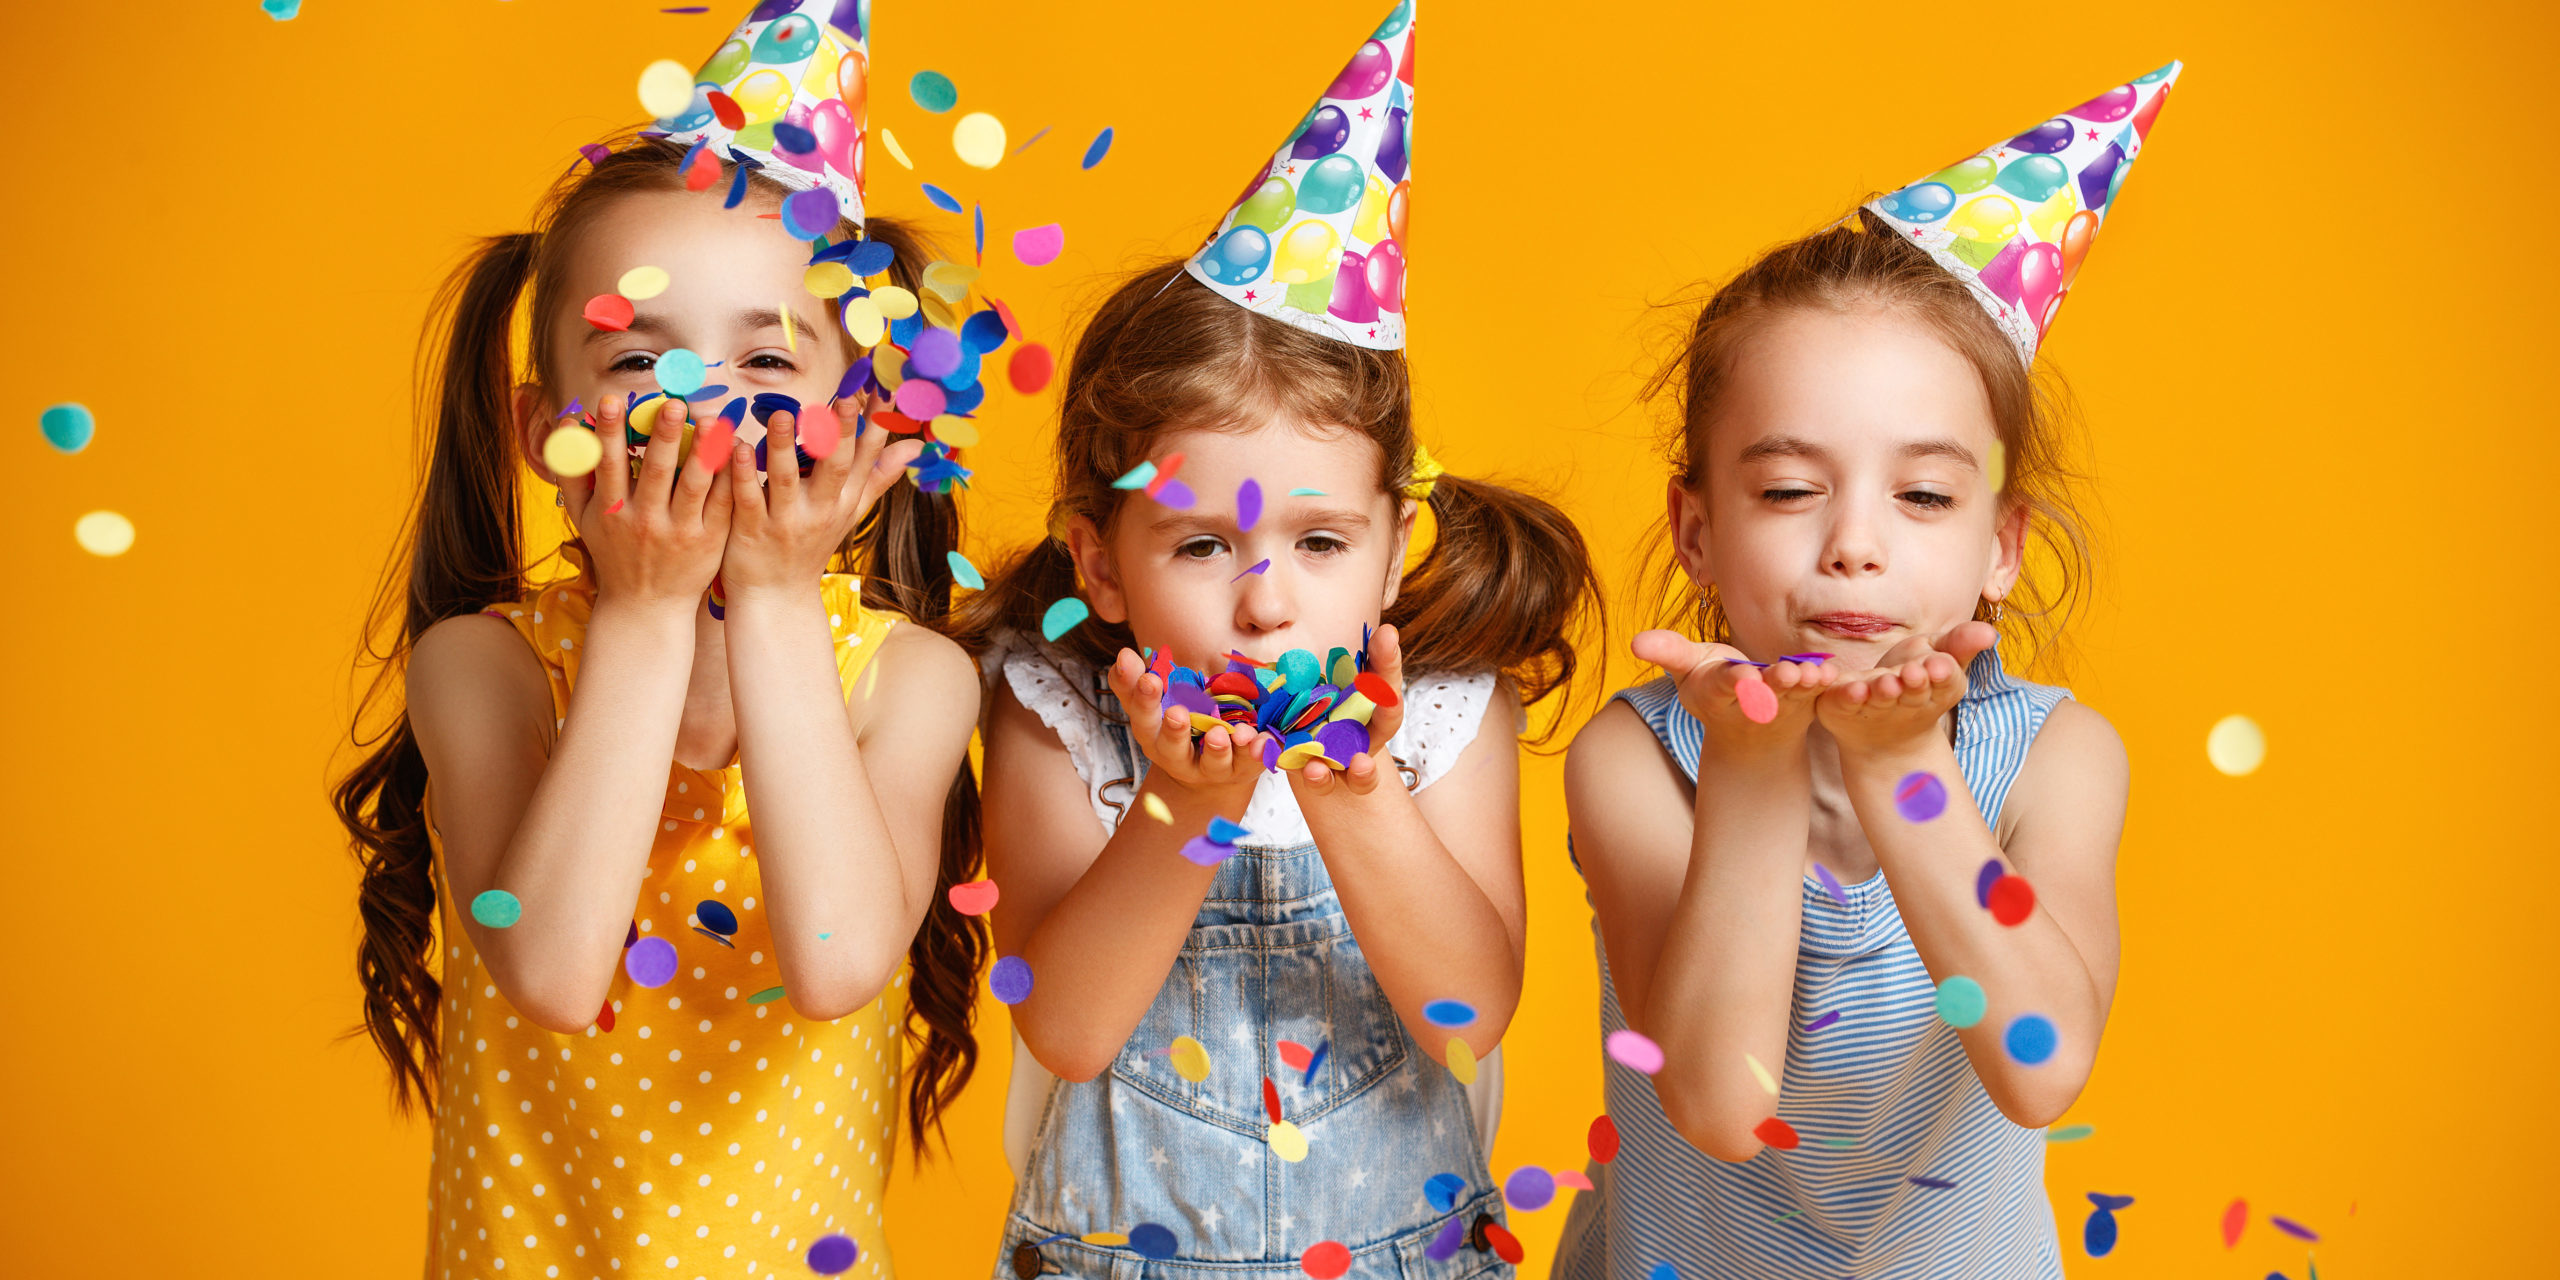 Happy,Birthday,Children,Girls,With,Confetti,On,Colored,Yellow,Background